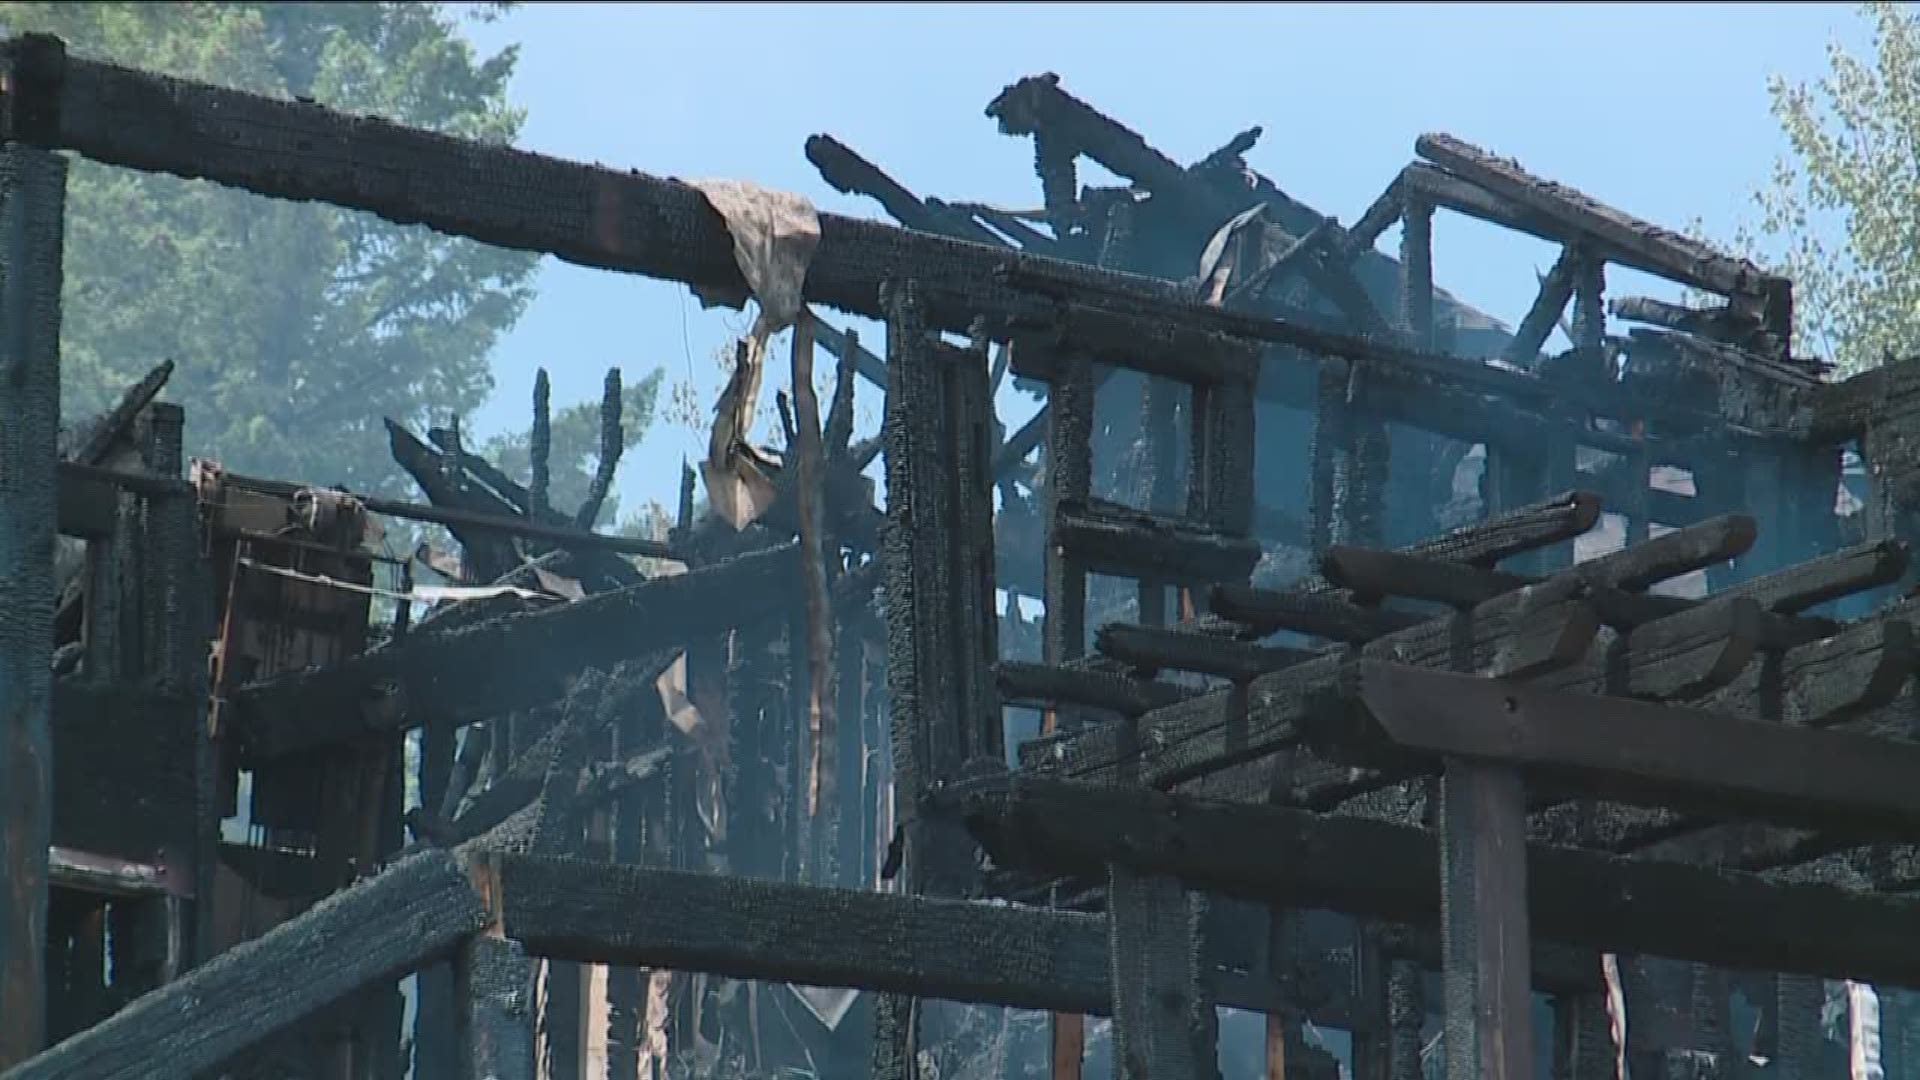 Four people died and one man was treated and released from the hospital following the fire that destroyed a cabin in Donnelly, Idaho, the night of June 30, 2017.